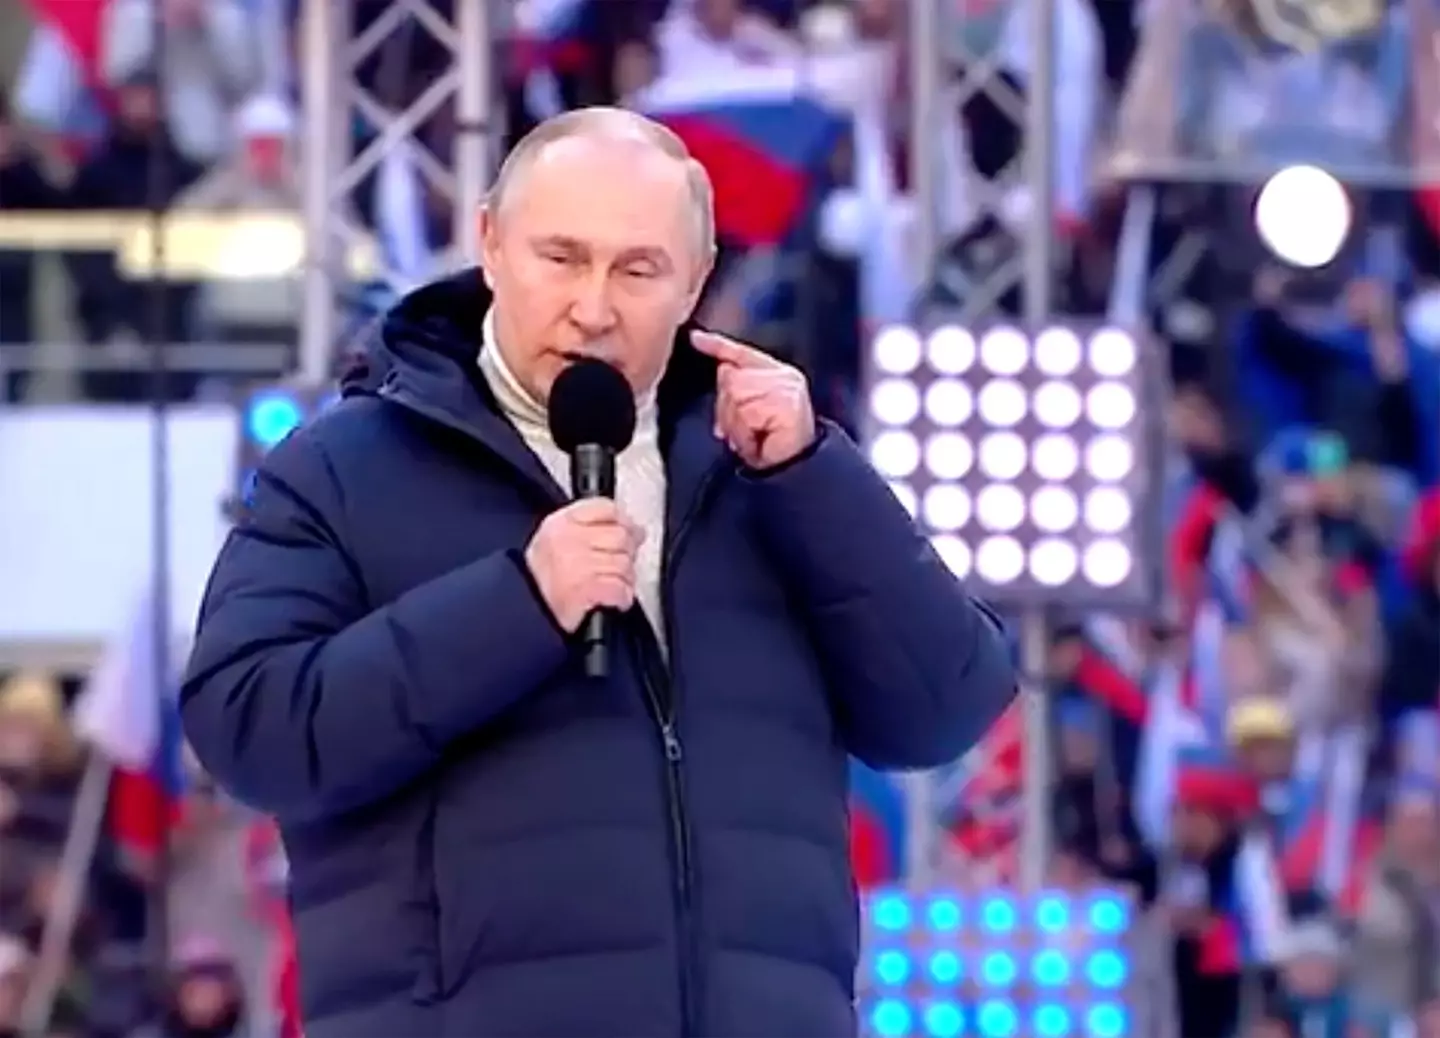 Putin at a rally in Moscow earlier this year.